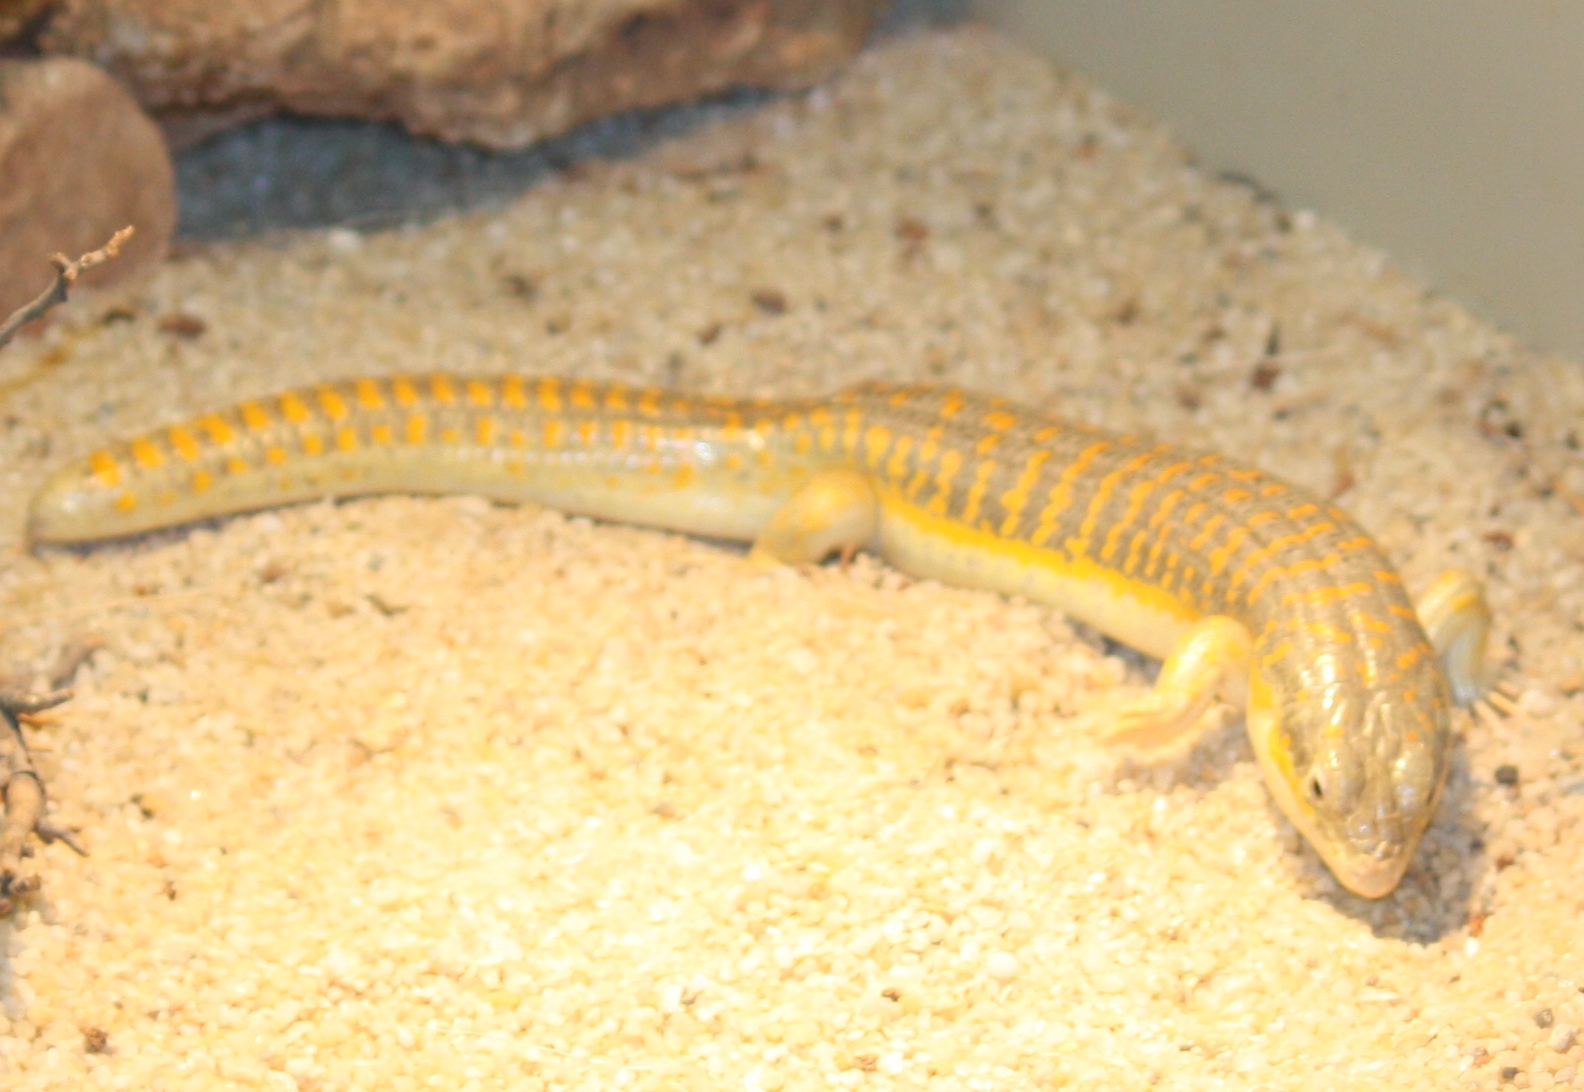 About Berber Skinks